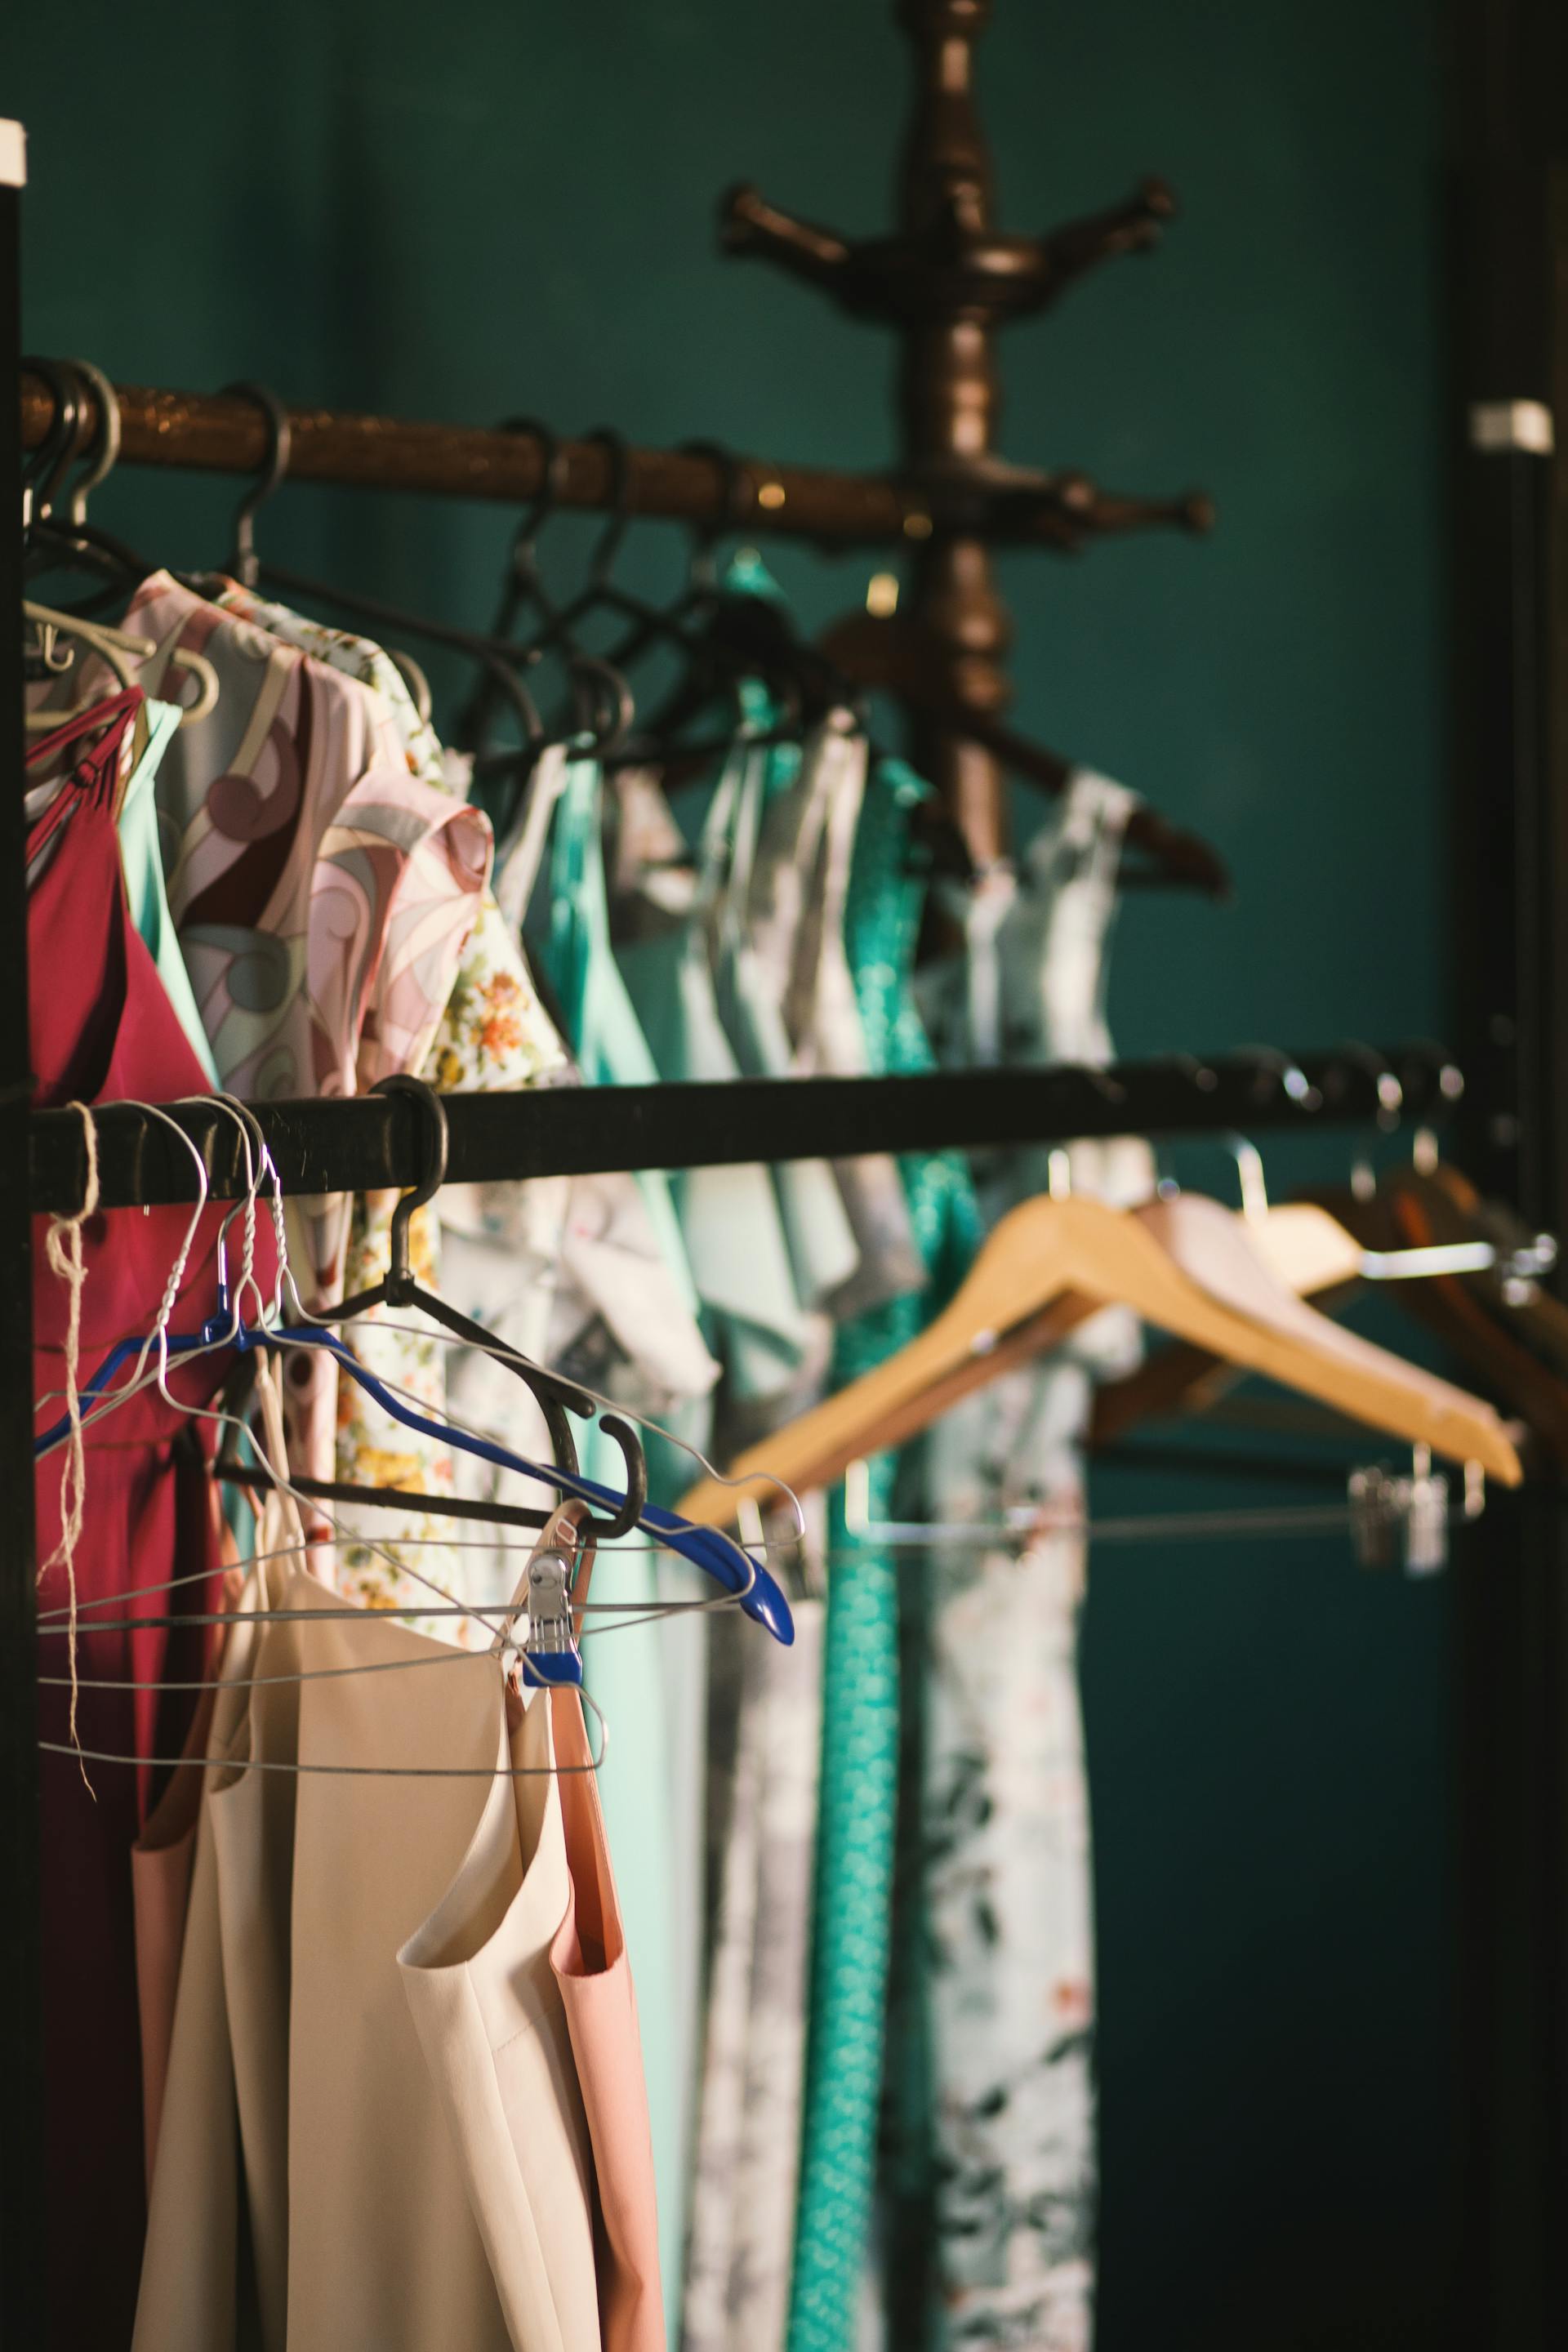 A rack of clothing | Source: Pexels